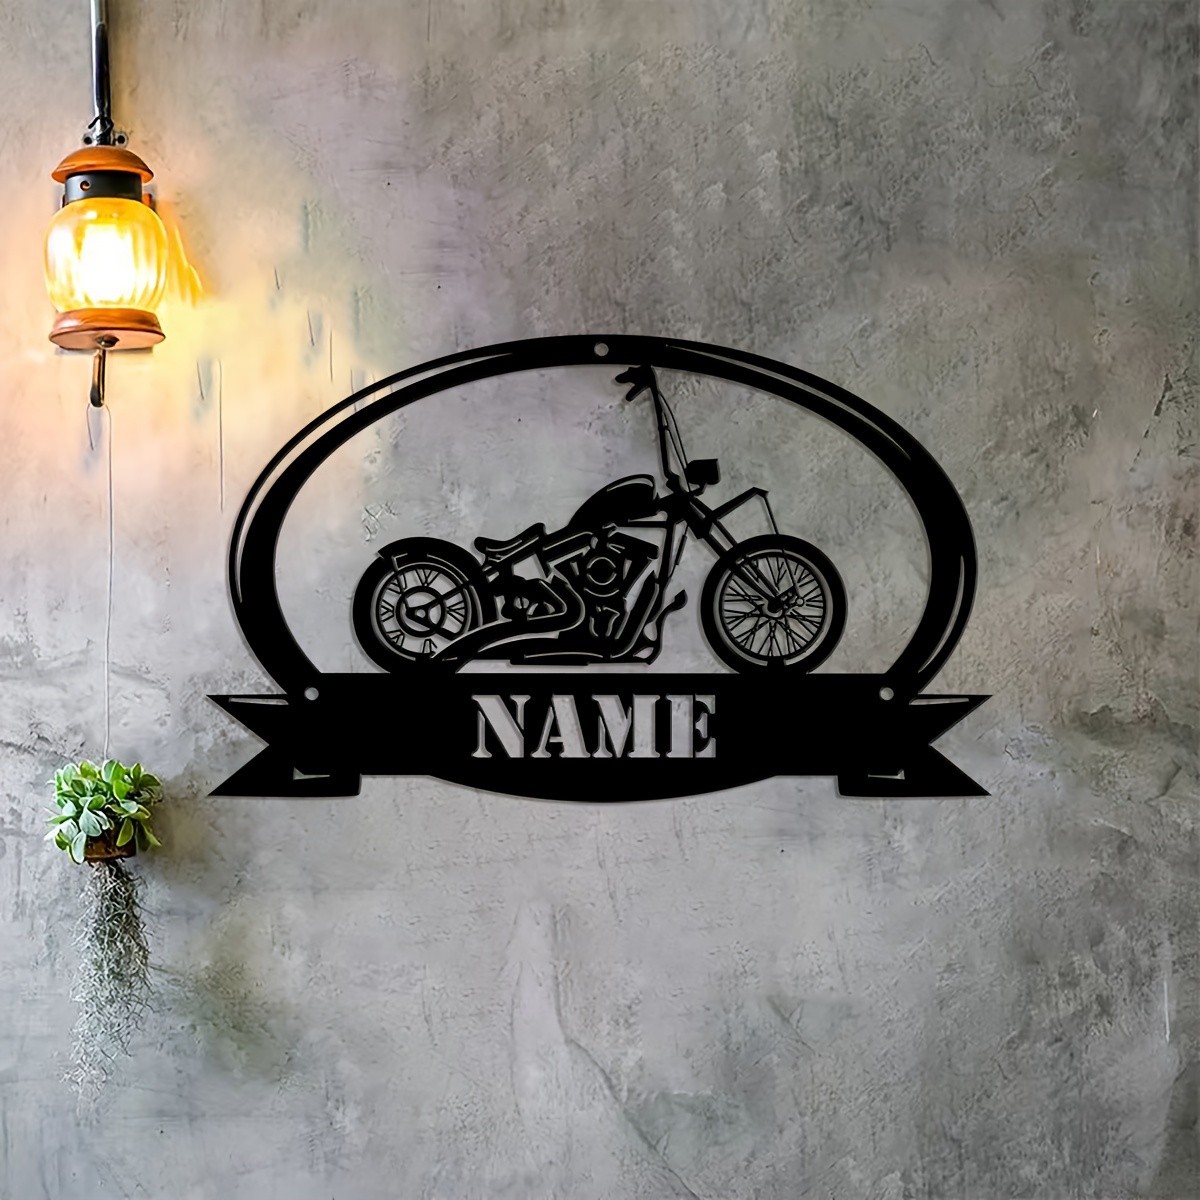 

1pc Custom Sign, Motorcycle Sign, Motorcycle Metal Wall Art, Personalized Biker Name Sign, Men Cave Metal Art, Biker Gift, Sign For Biker, Fathers Day Gifts, For Home Room Living Room Office Decor